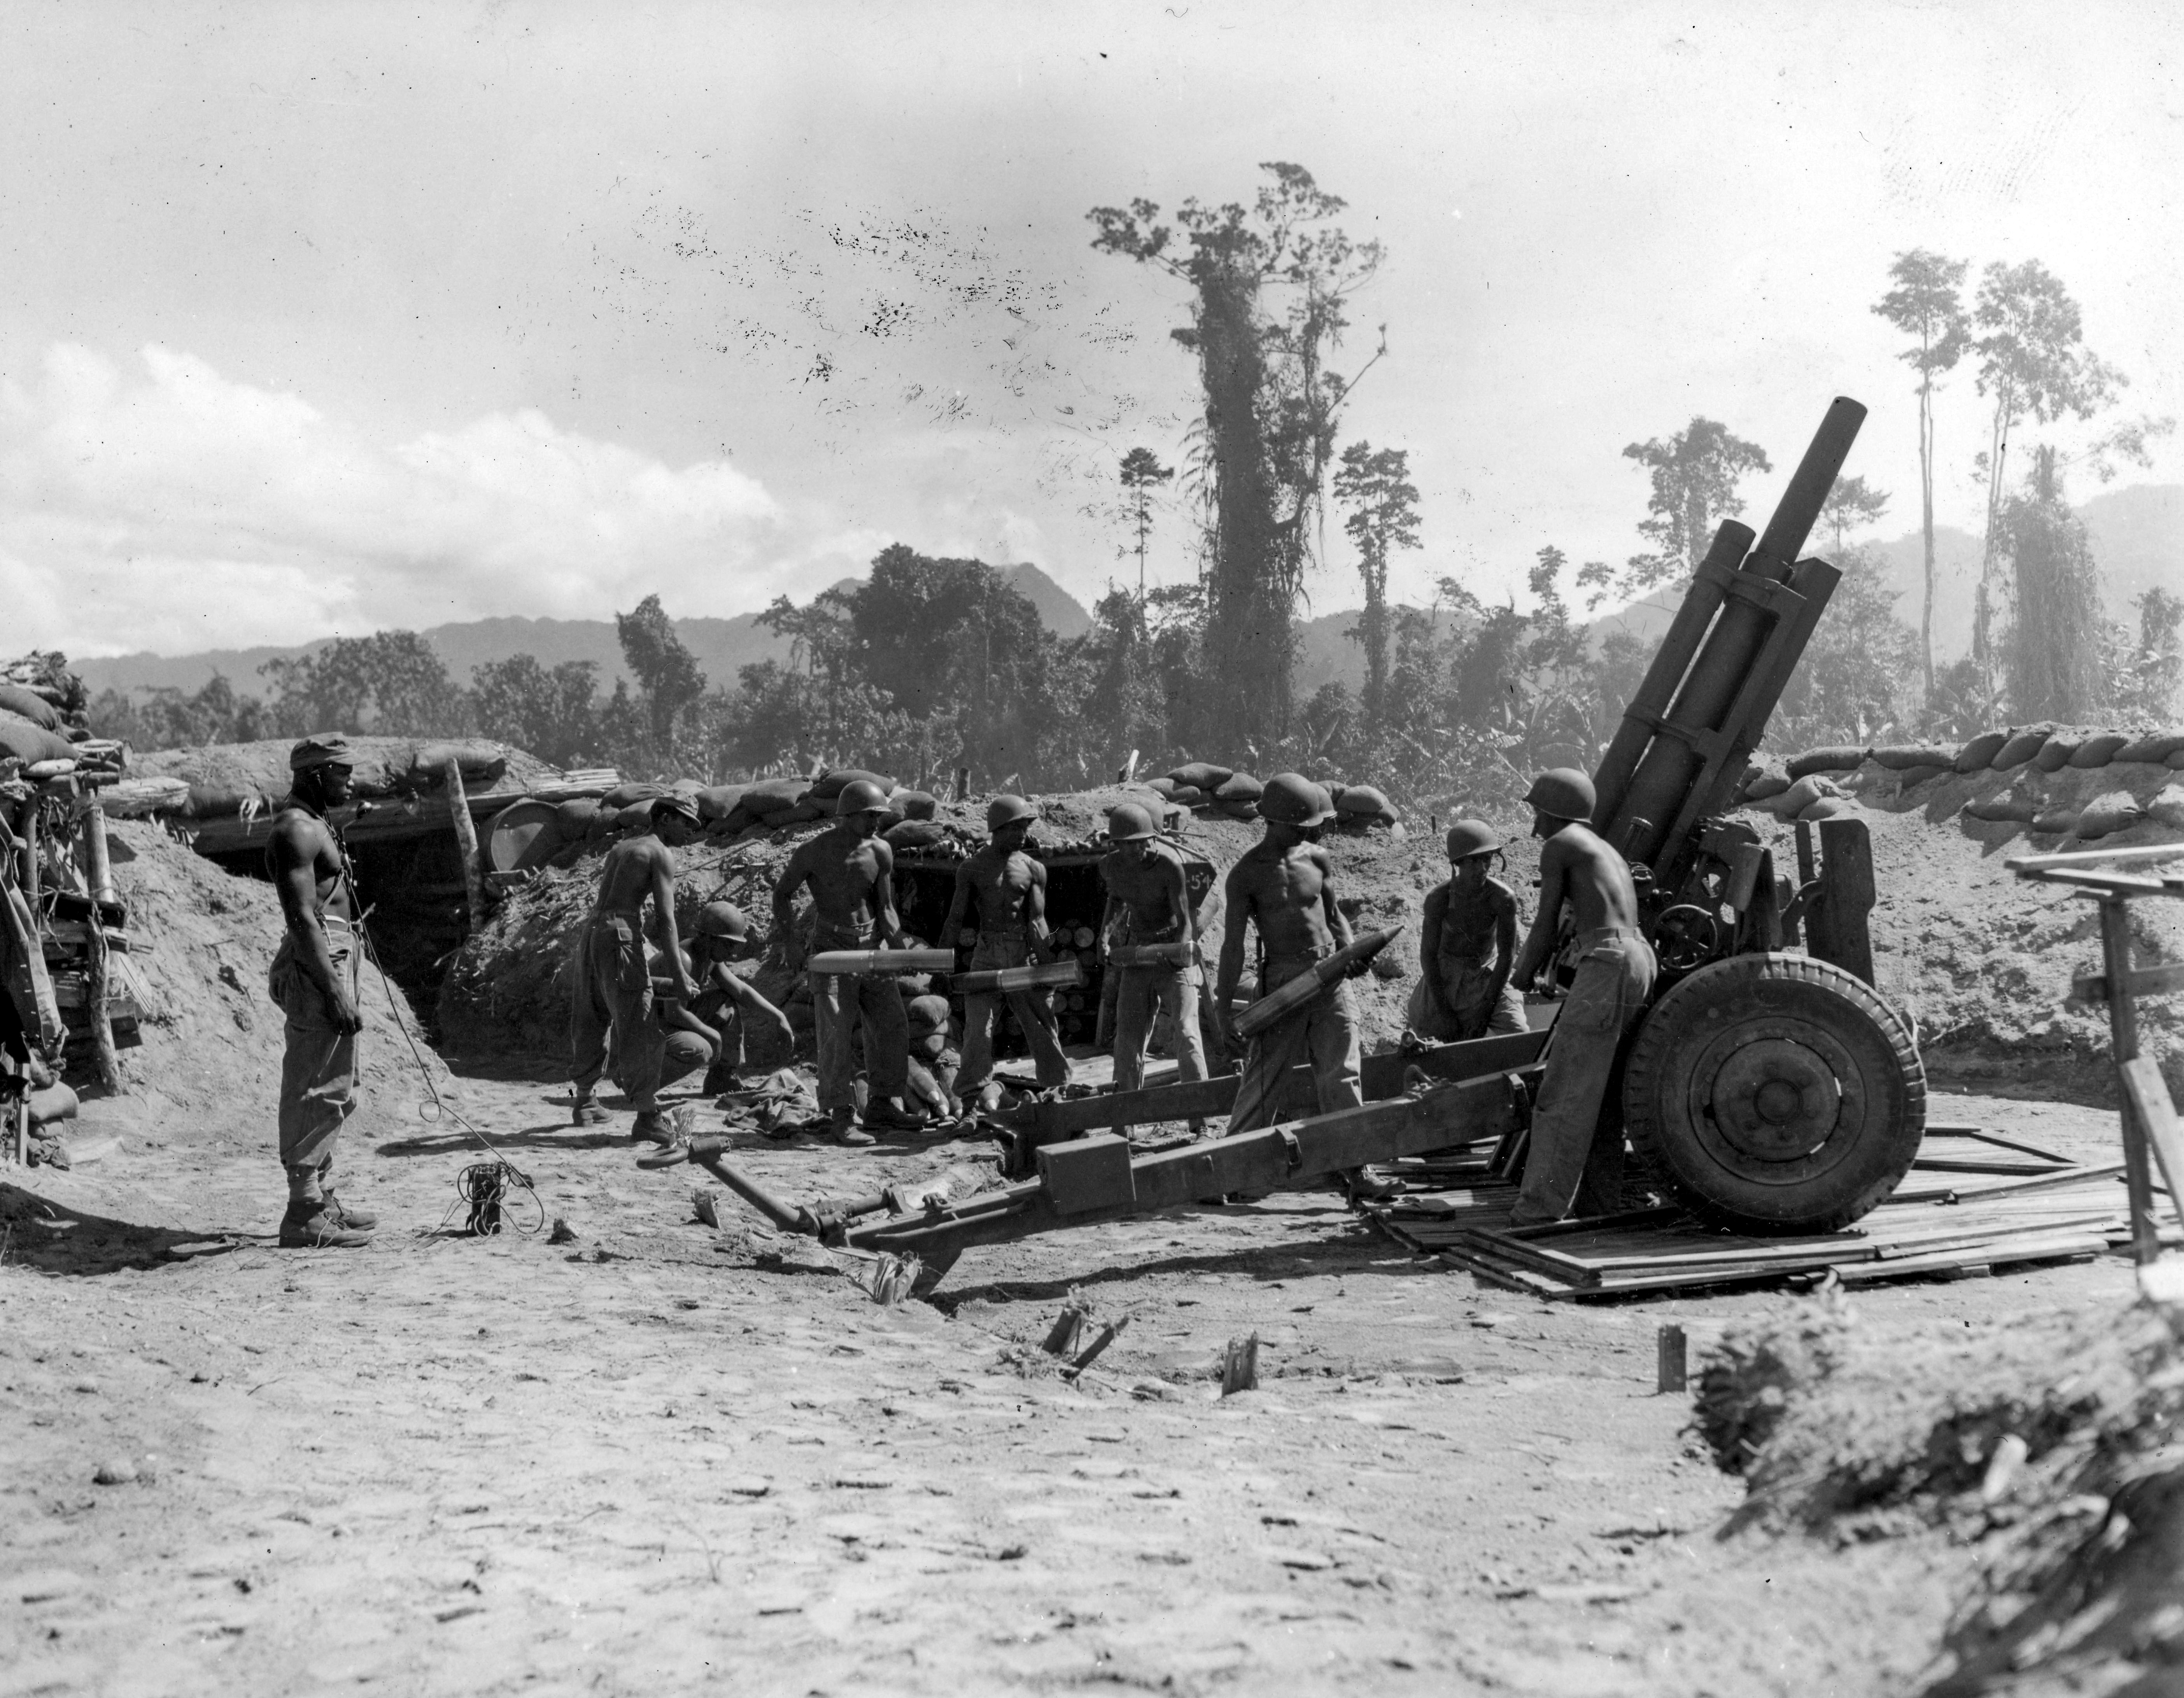 An image of A howitzer of the 593rd Field Artillery Battalion